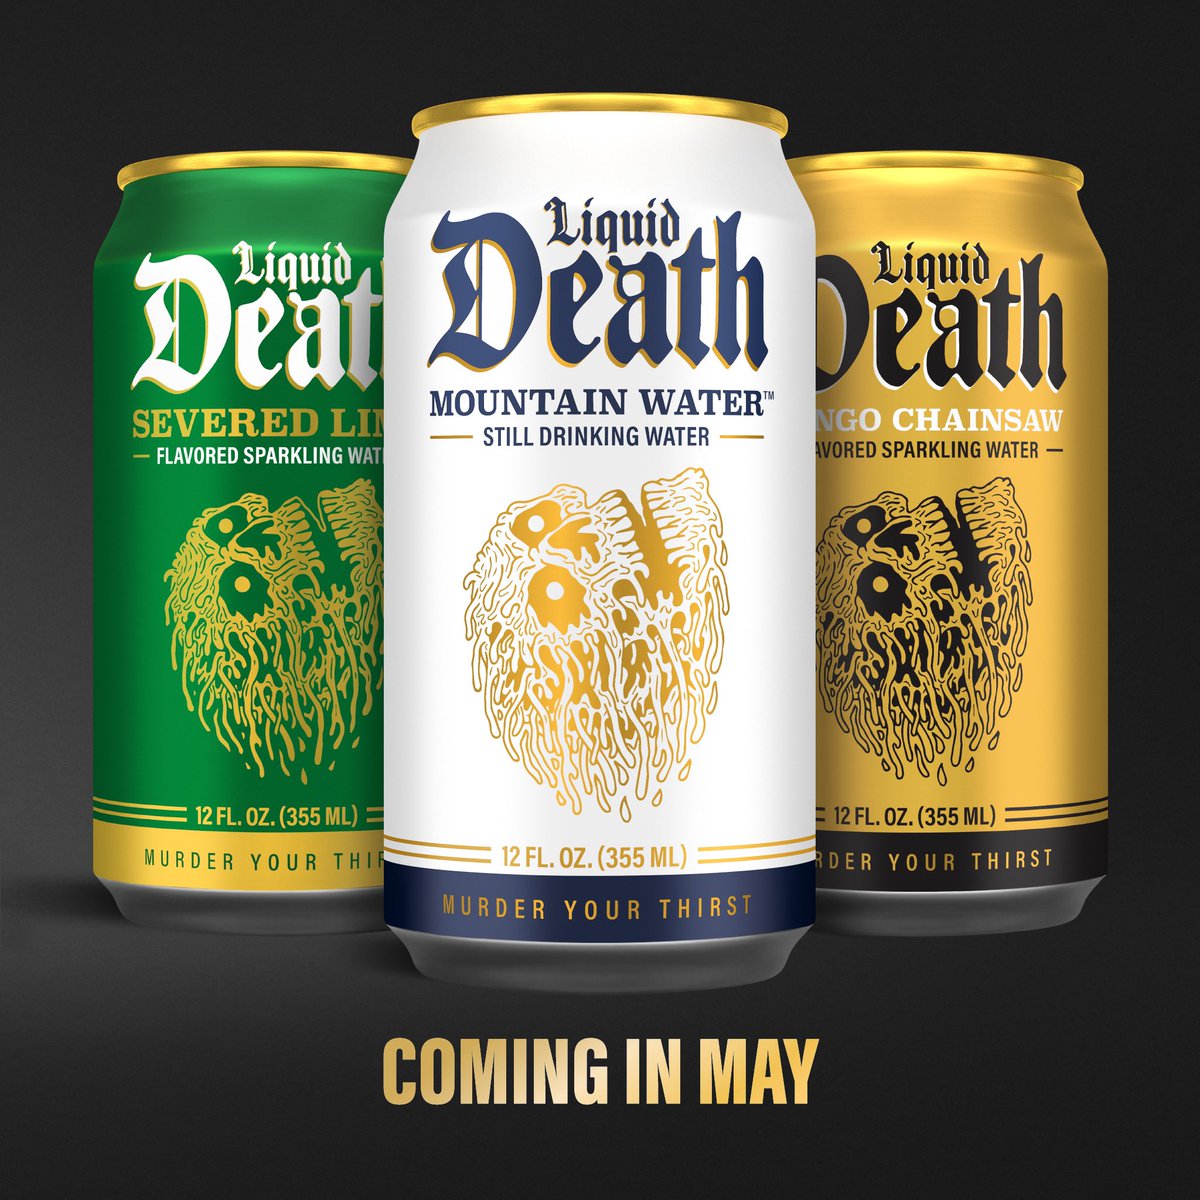 Classic 12oz Shorty cans mean you no longer have to be a professional degenerate to crush a Liquid Death in under 7 seconds. Coming to select retail late spring.